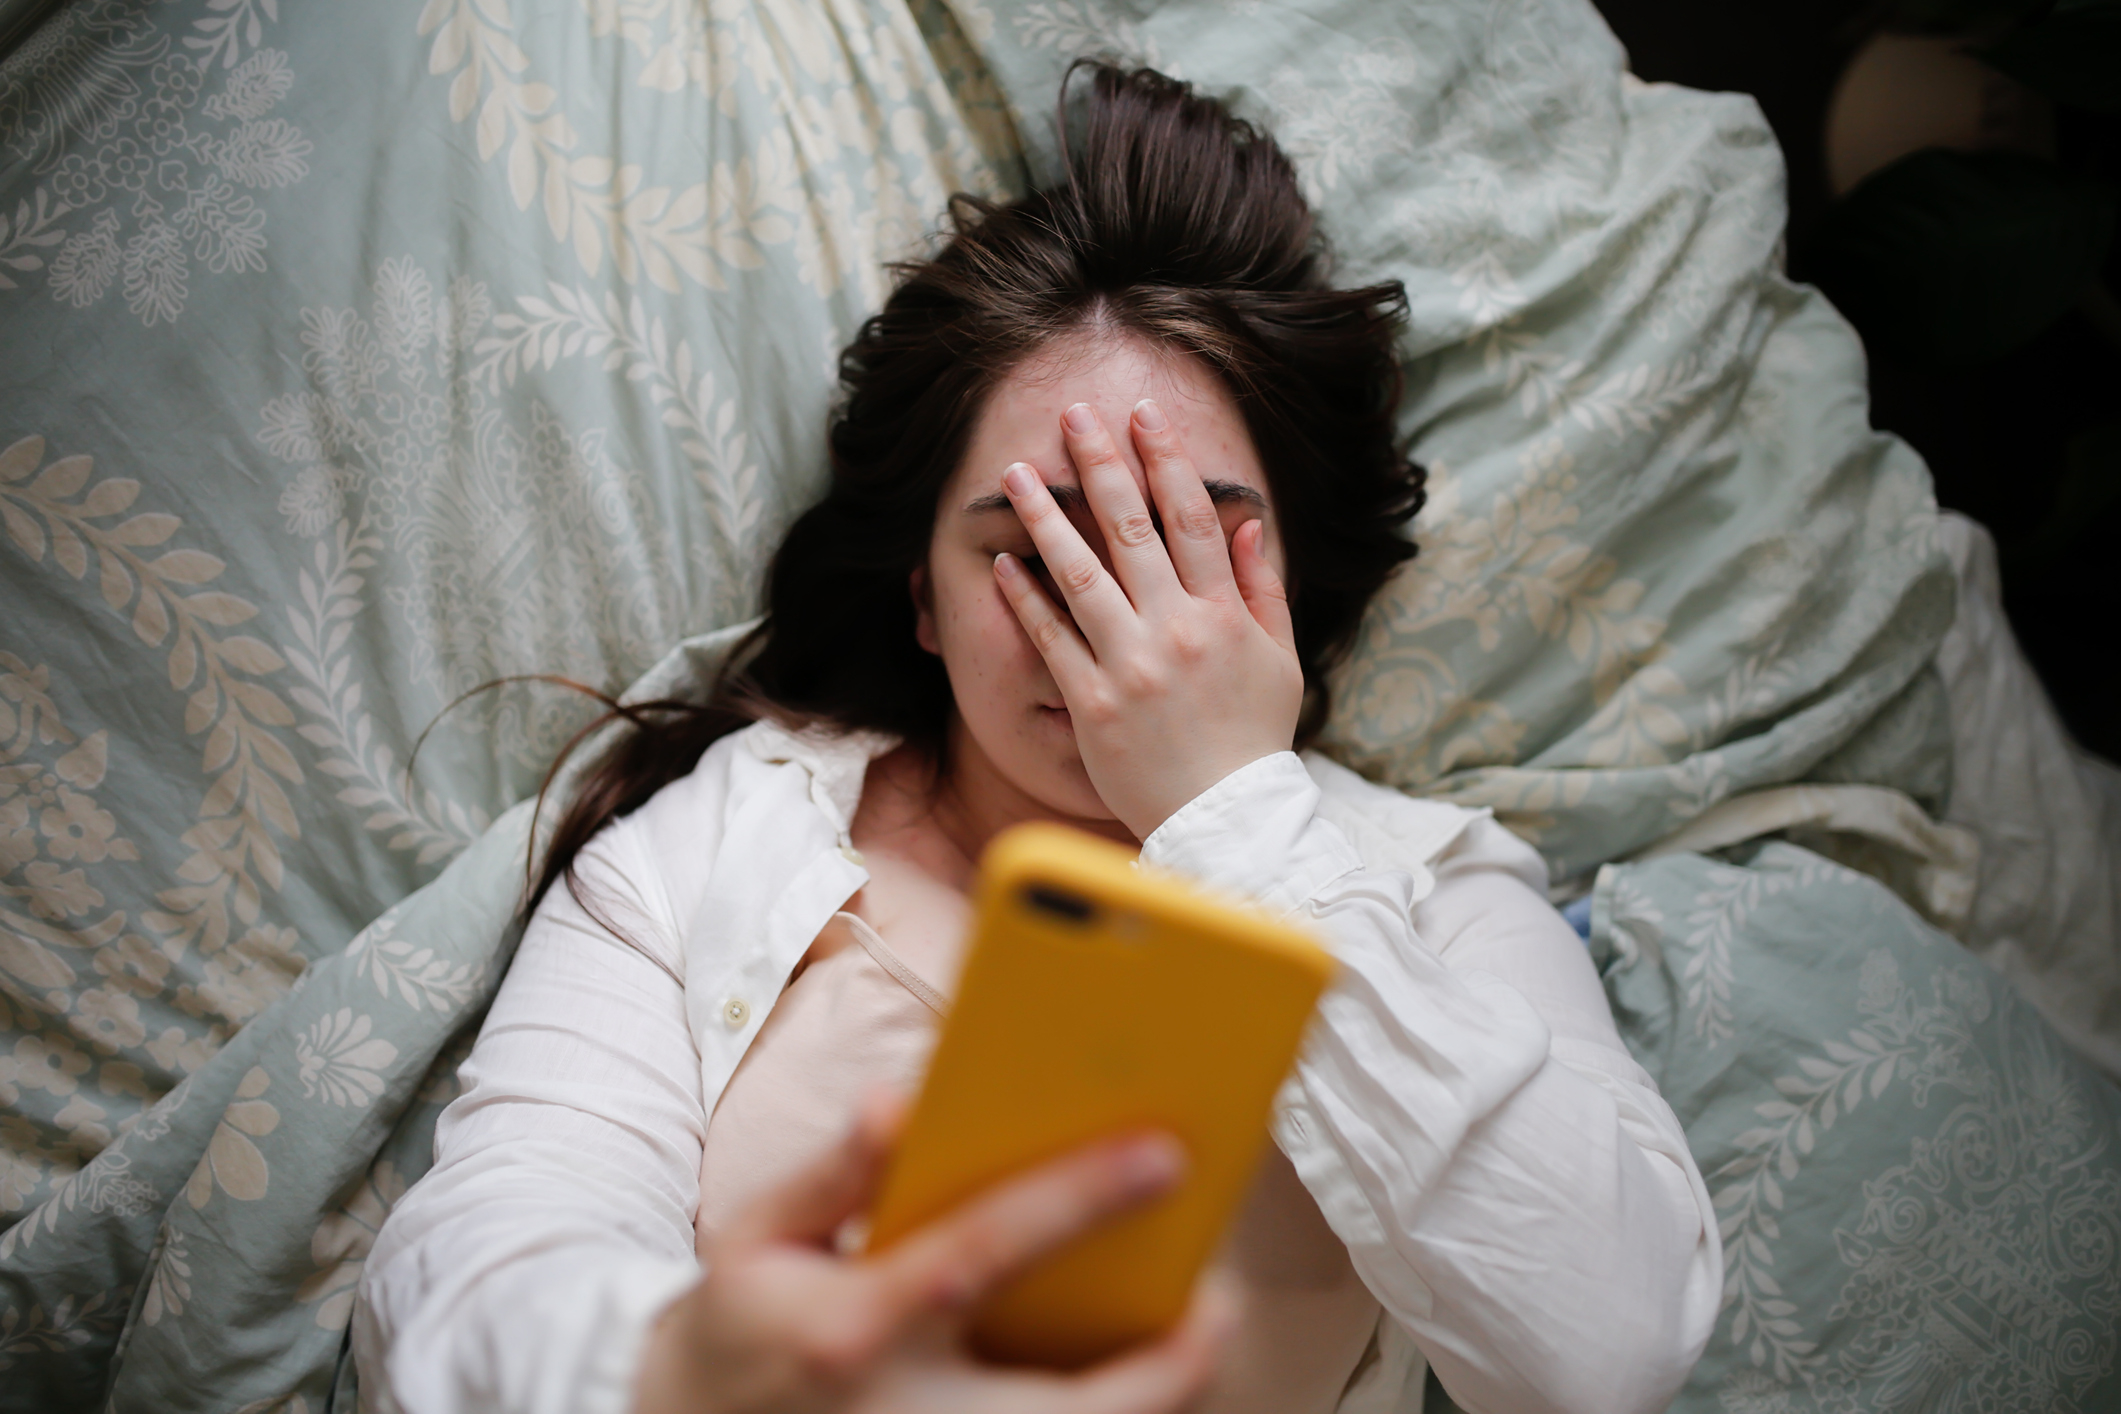 Person in bed holding phone with hand on face, looks stressed or tired